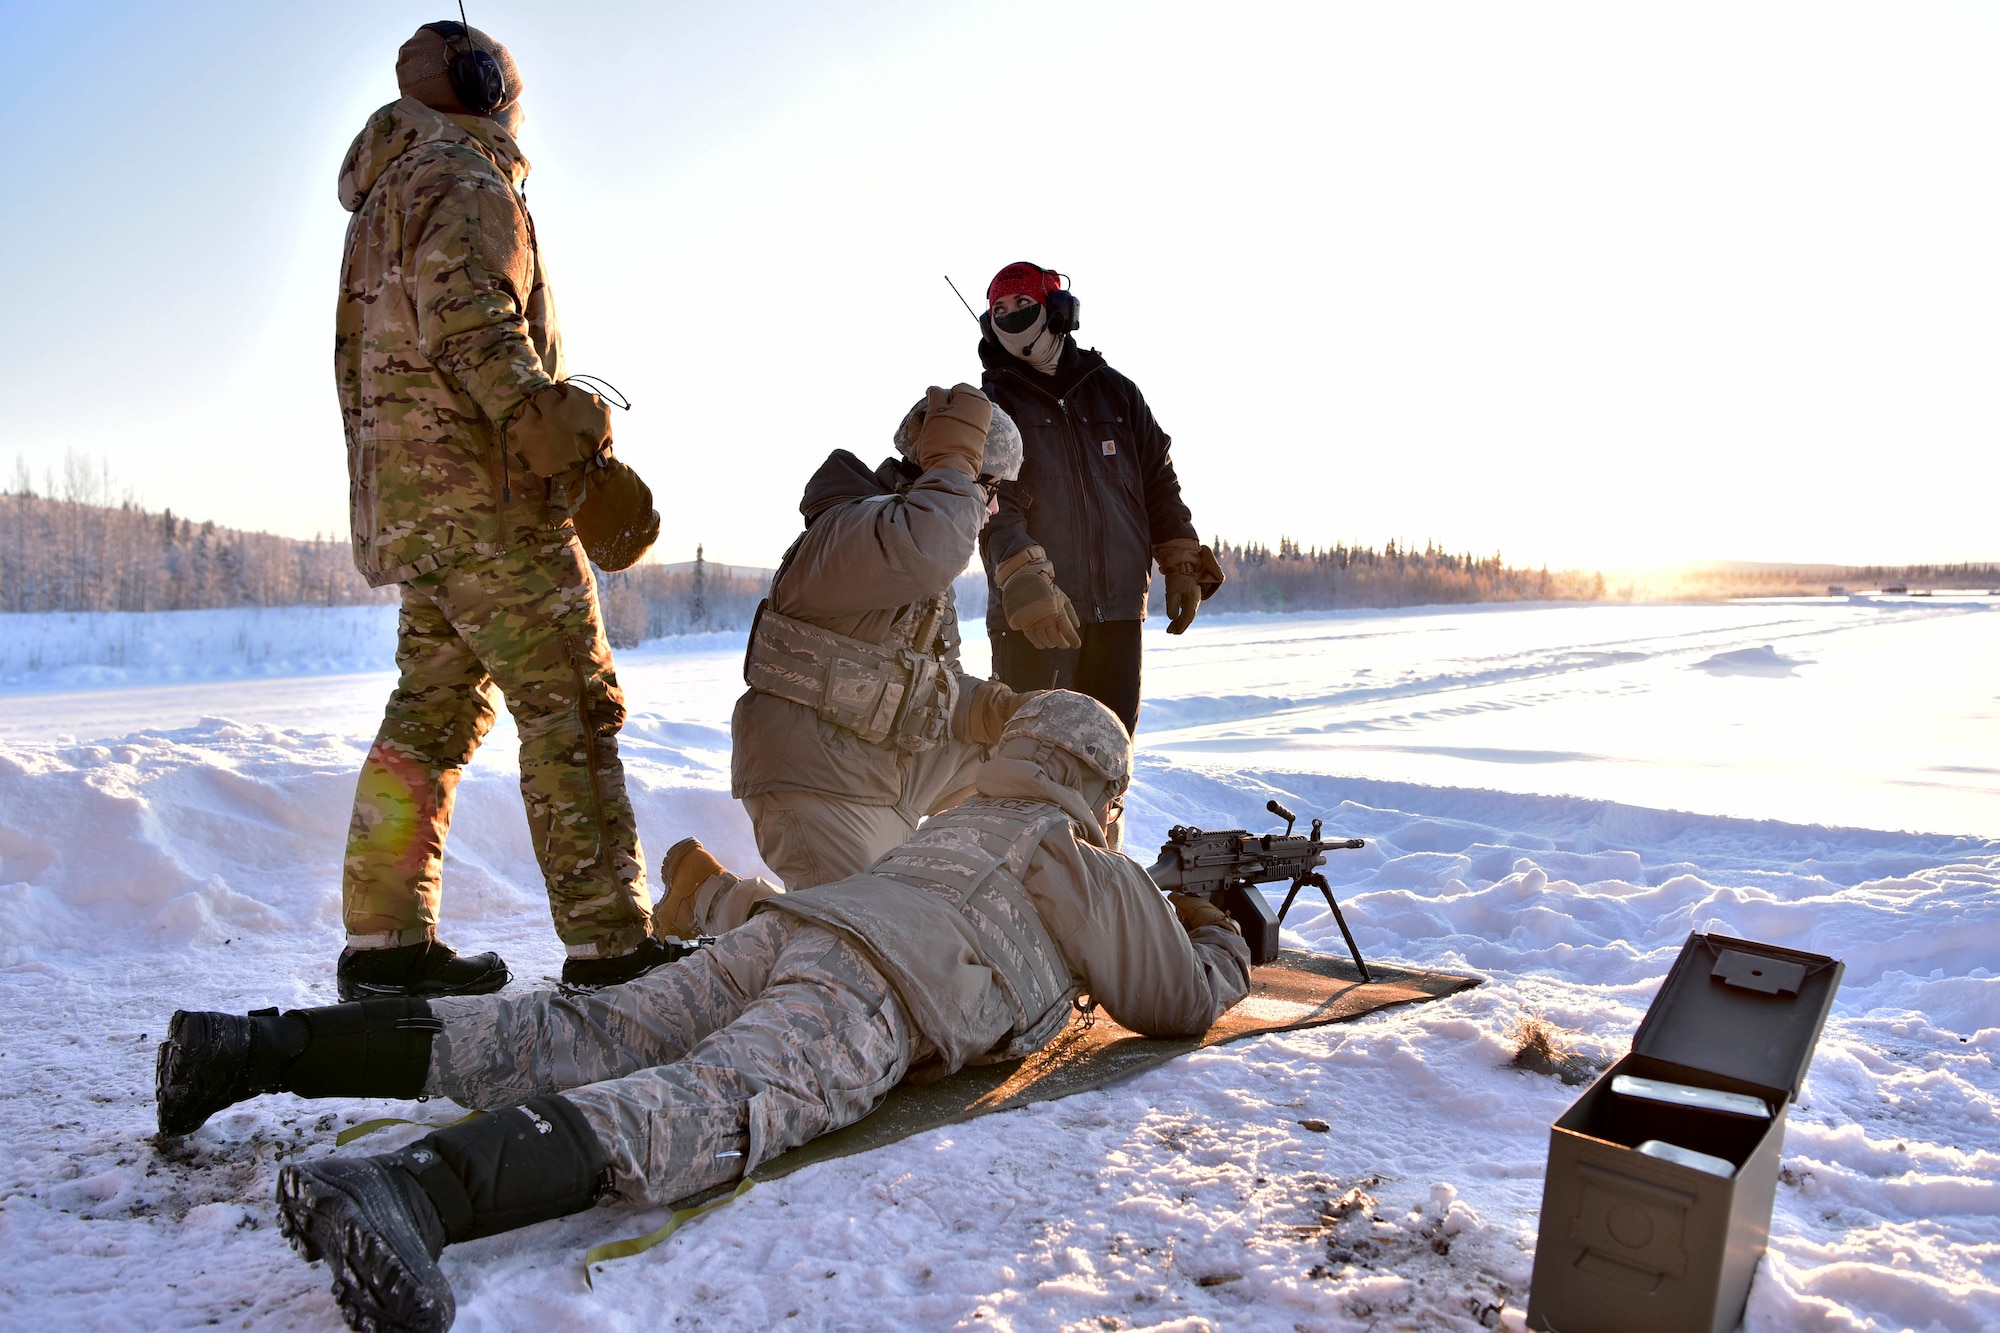 354th Security Forces Squadron Combat Arms Training and Maintenance (CATM) instructors oversee Airmen preparing to fire an M-249 Squad Automatic Weapon at Eielson Air Force Base, Alaska, Jan. 9, 2020. CATM instructors are responsible for training Airmen how to use various small arms weapon systems. (U.S. Air Force photo by Senior Airman Beaux Hebert)